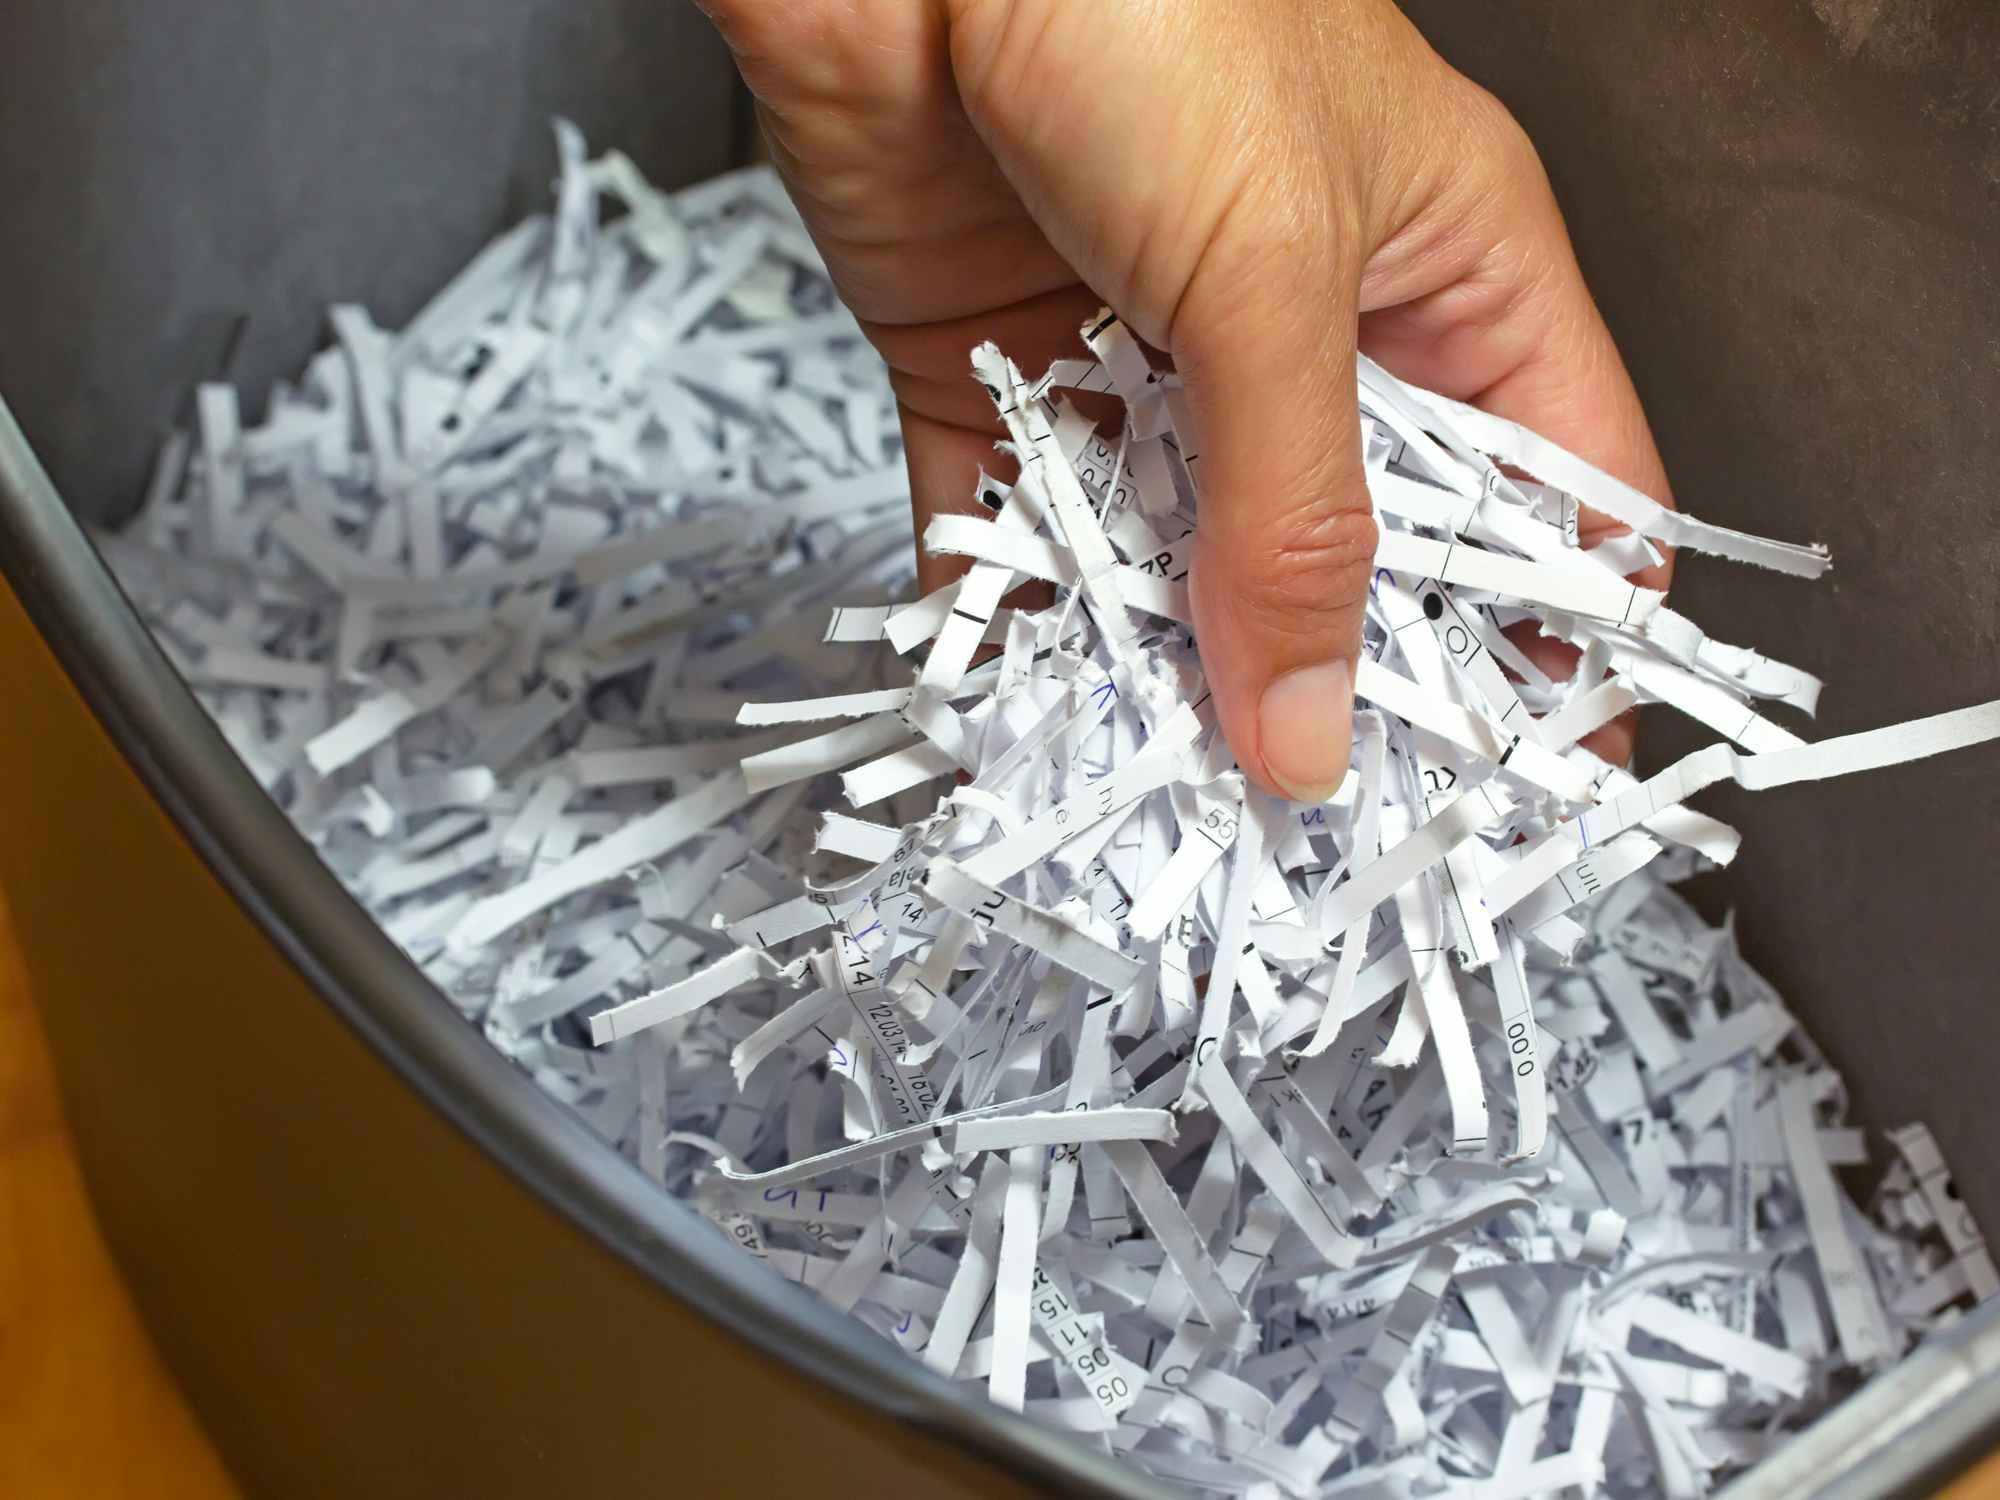 Someone holding a handful of shredded paper above a bin full of paper shreds